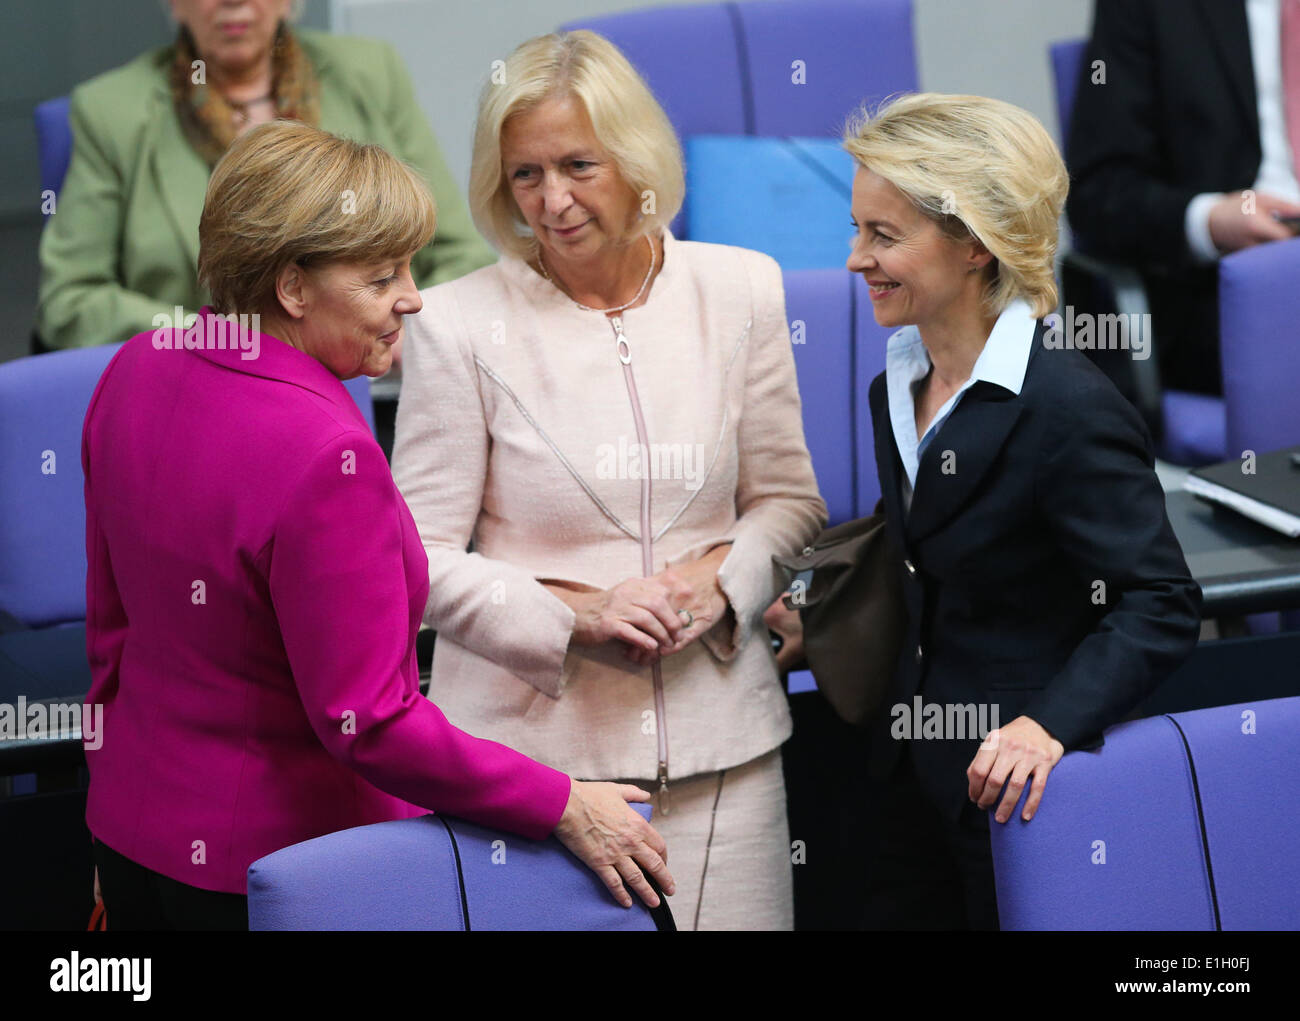 Berlin, Germany. 4th June, 2014. (L-R) German Chancellor Angela Merkel, German Education and Research Minister Johanna Wanka and German Defence Minister Ursula von der Leyen attend a meeting session at the Bundestag, the lower house of parliament, in Berlin, Germany, on June 4, 2014. The G7 Summit set for Brussels on June 4-5 will focus on Ukraine situation, ties with Russia, global economy and energy security, according to preliminary agenda unveiled by the European Union (EU). Credit:  Zhang Fan/Xinhua/Alamy Live News Stock Photo